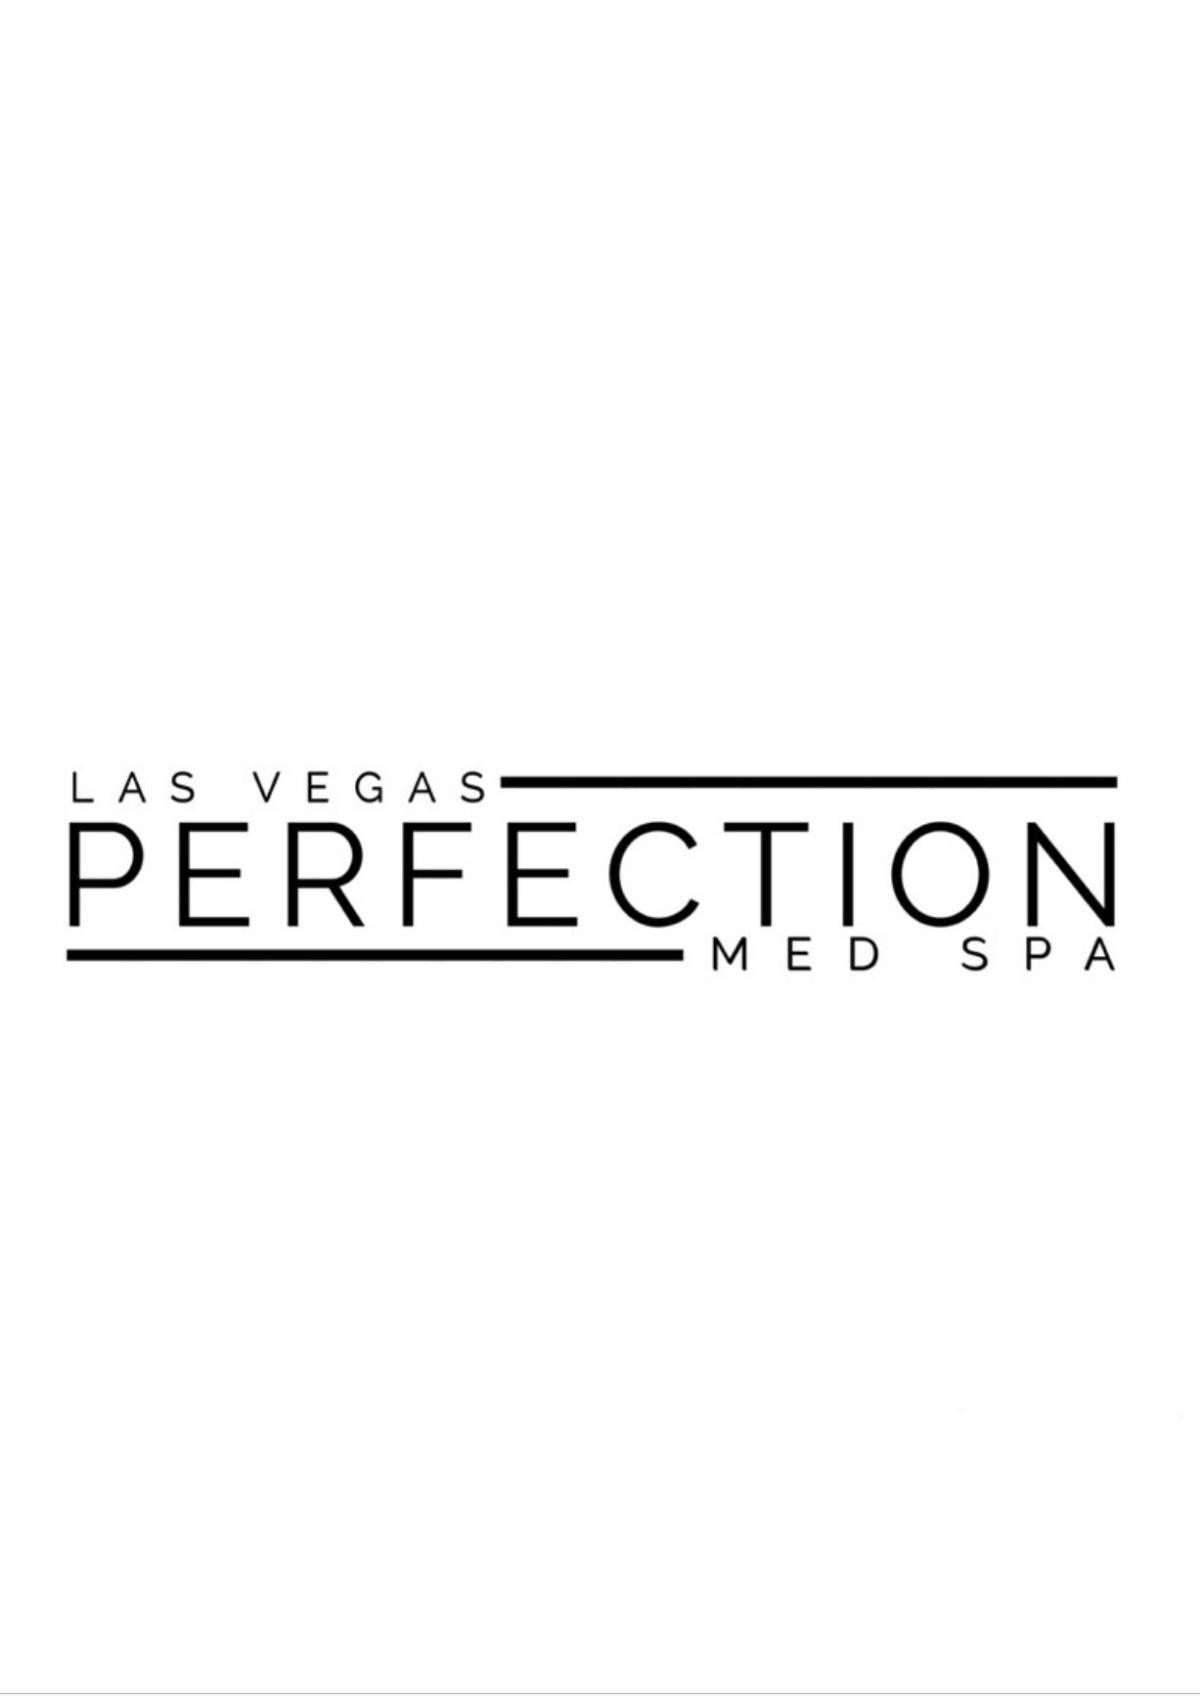 Perfection Med Spa